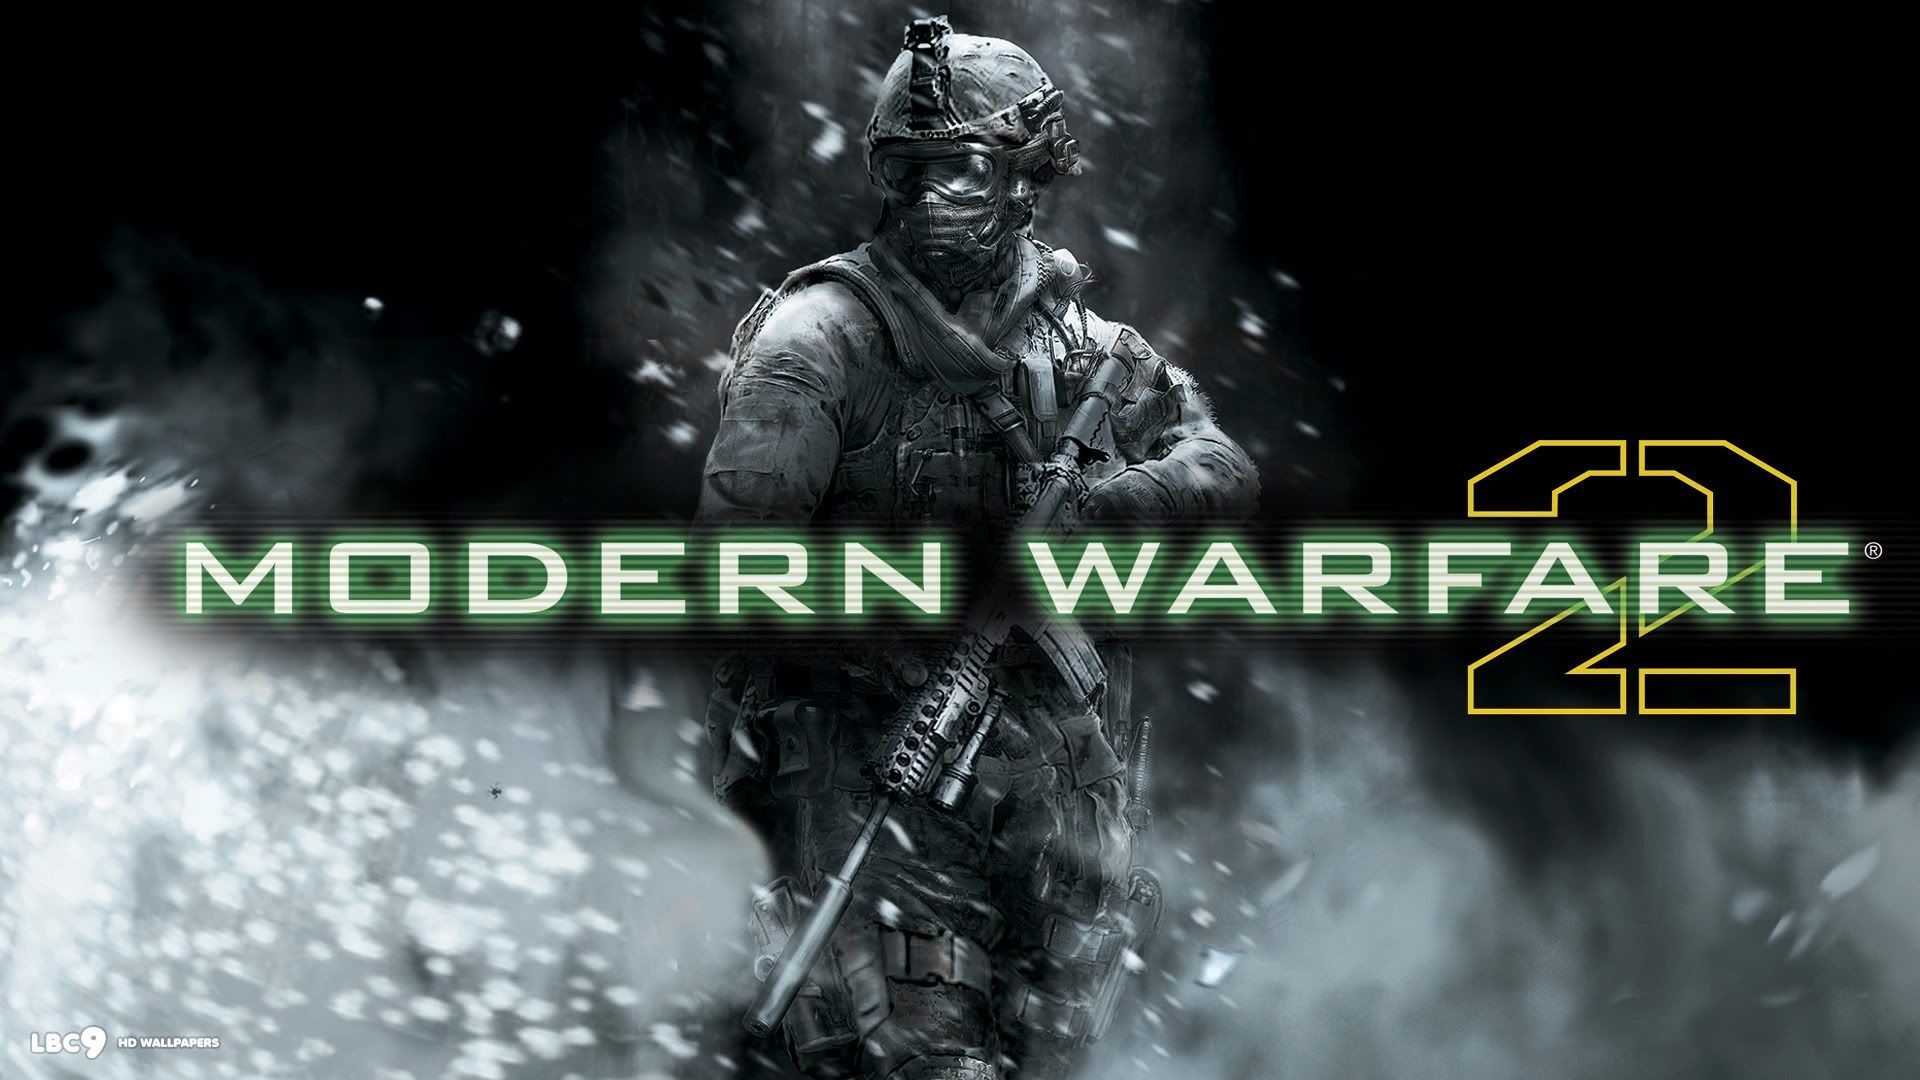 mw2 wallpaper,font,movie,fictional character,poster,darkness